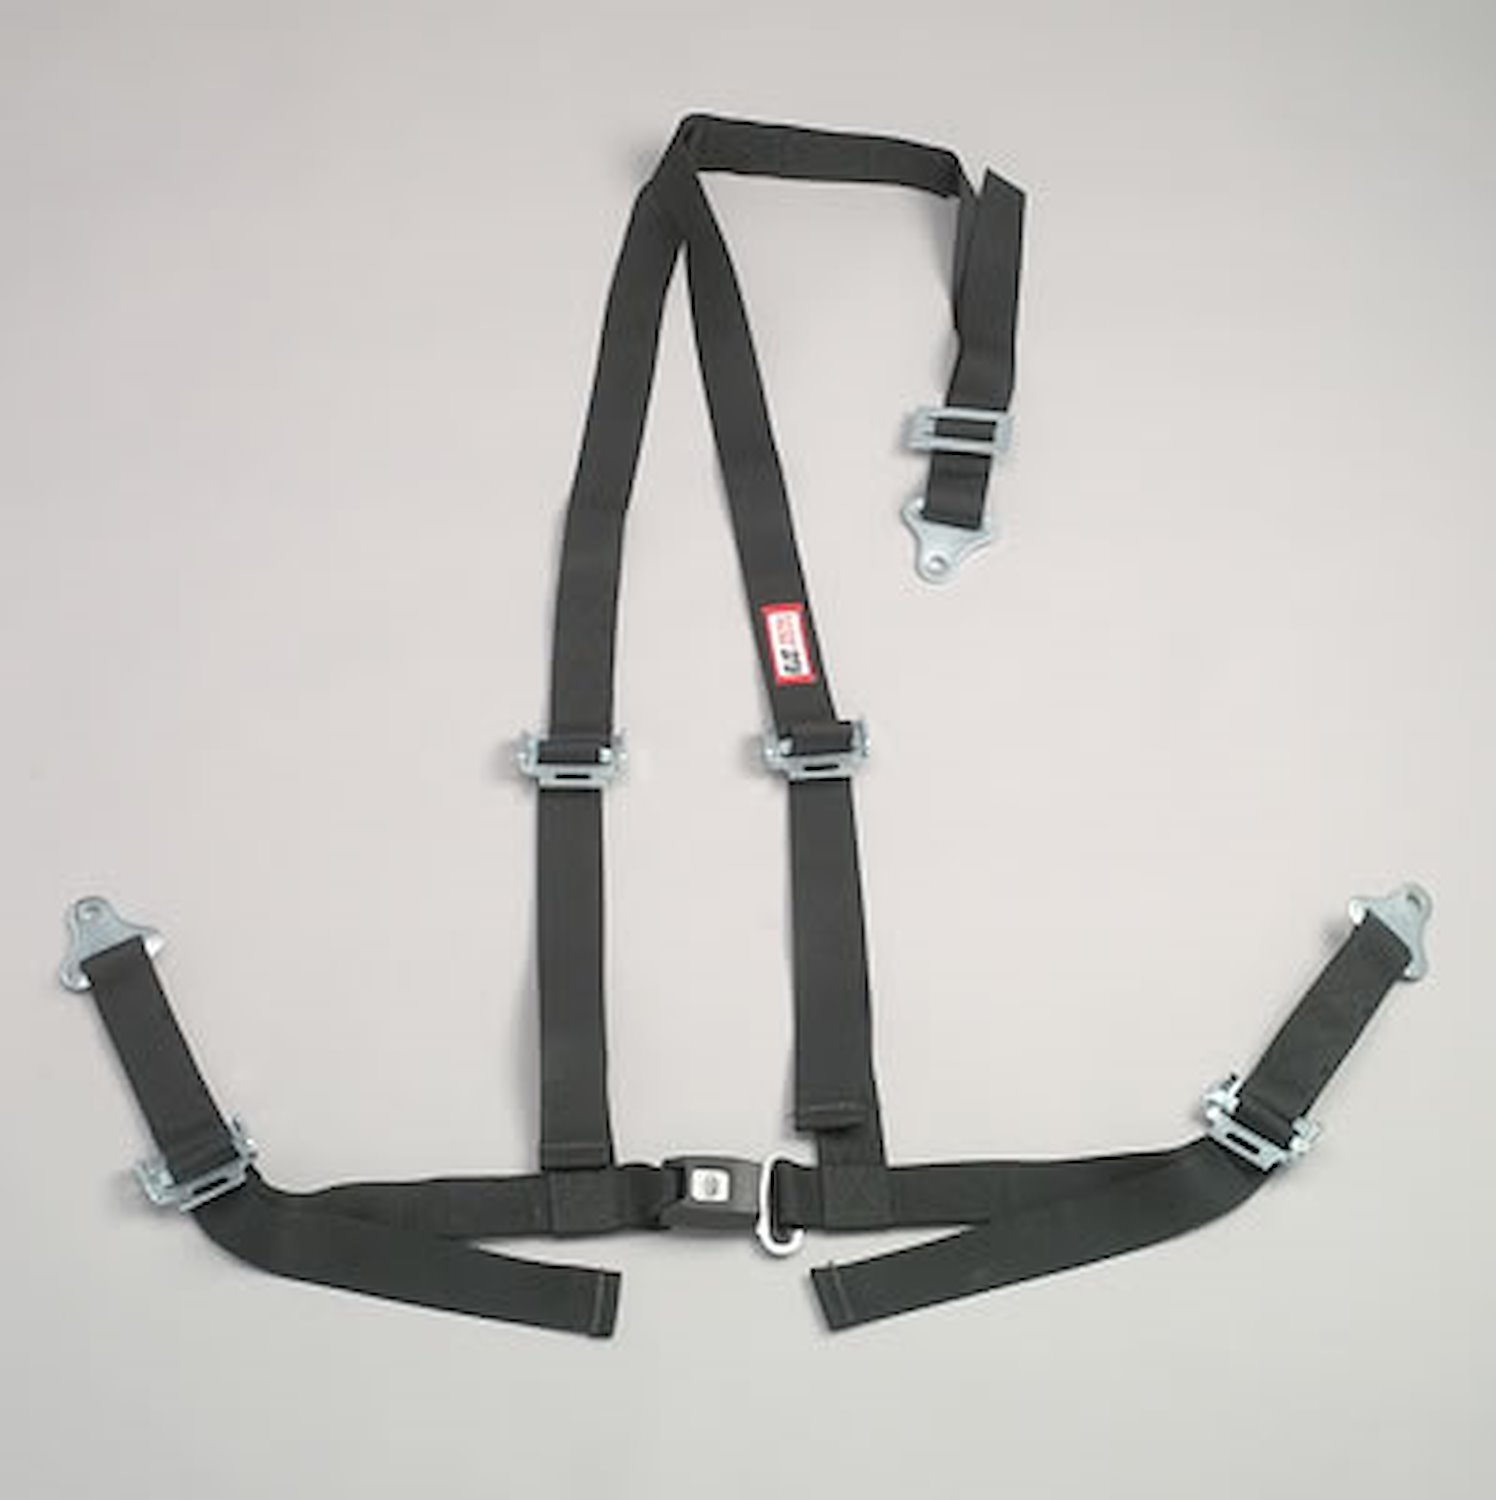 NON-SFI B&T HARNESS 2 PULL UP Lap Belt BOLT 2 S. H. Individual FLOOR Mount WRAP/BOLT w/STERNUM STRAP YELLOW